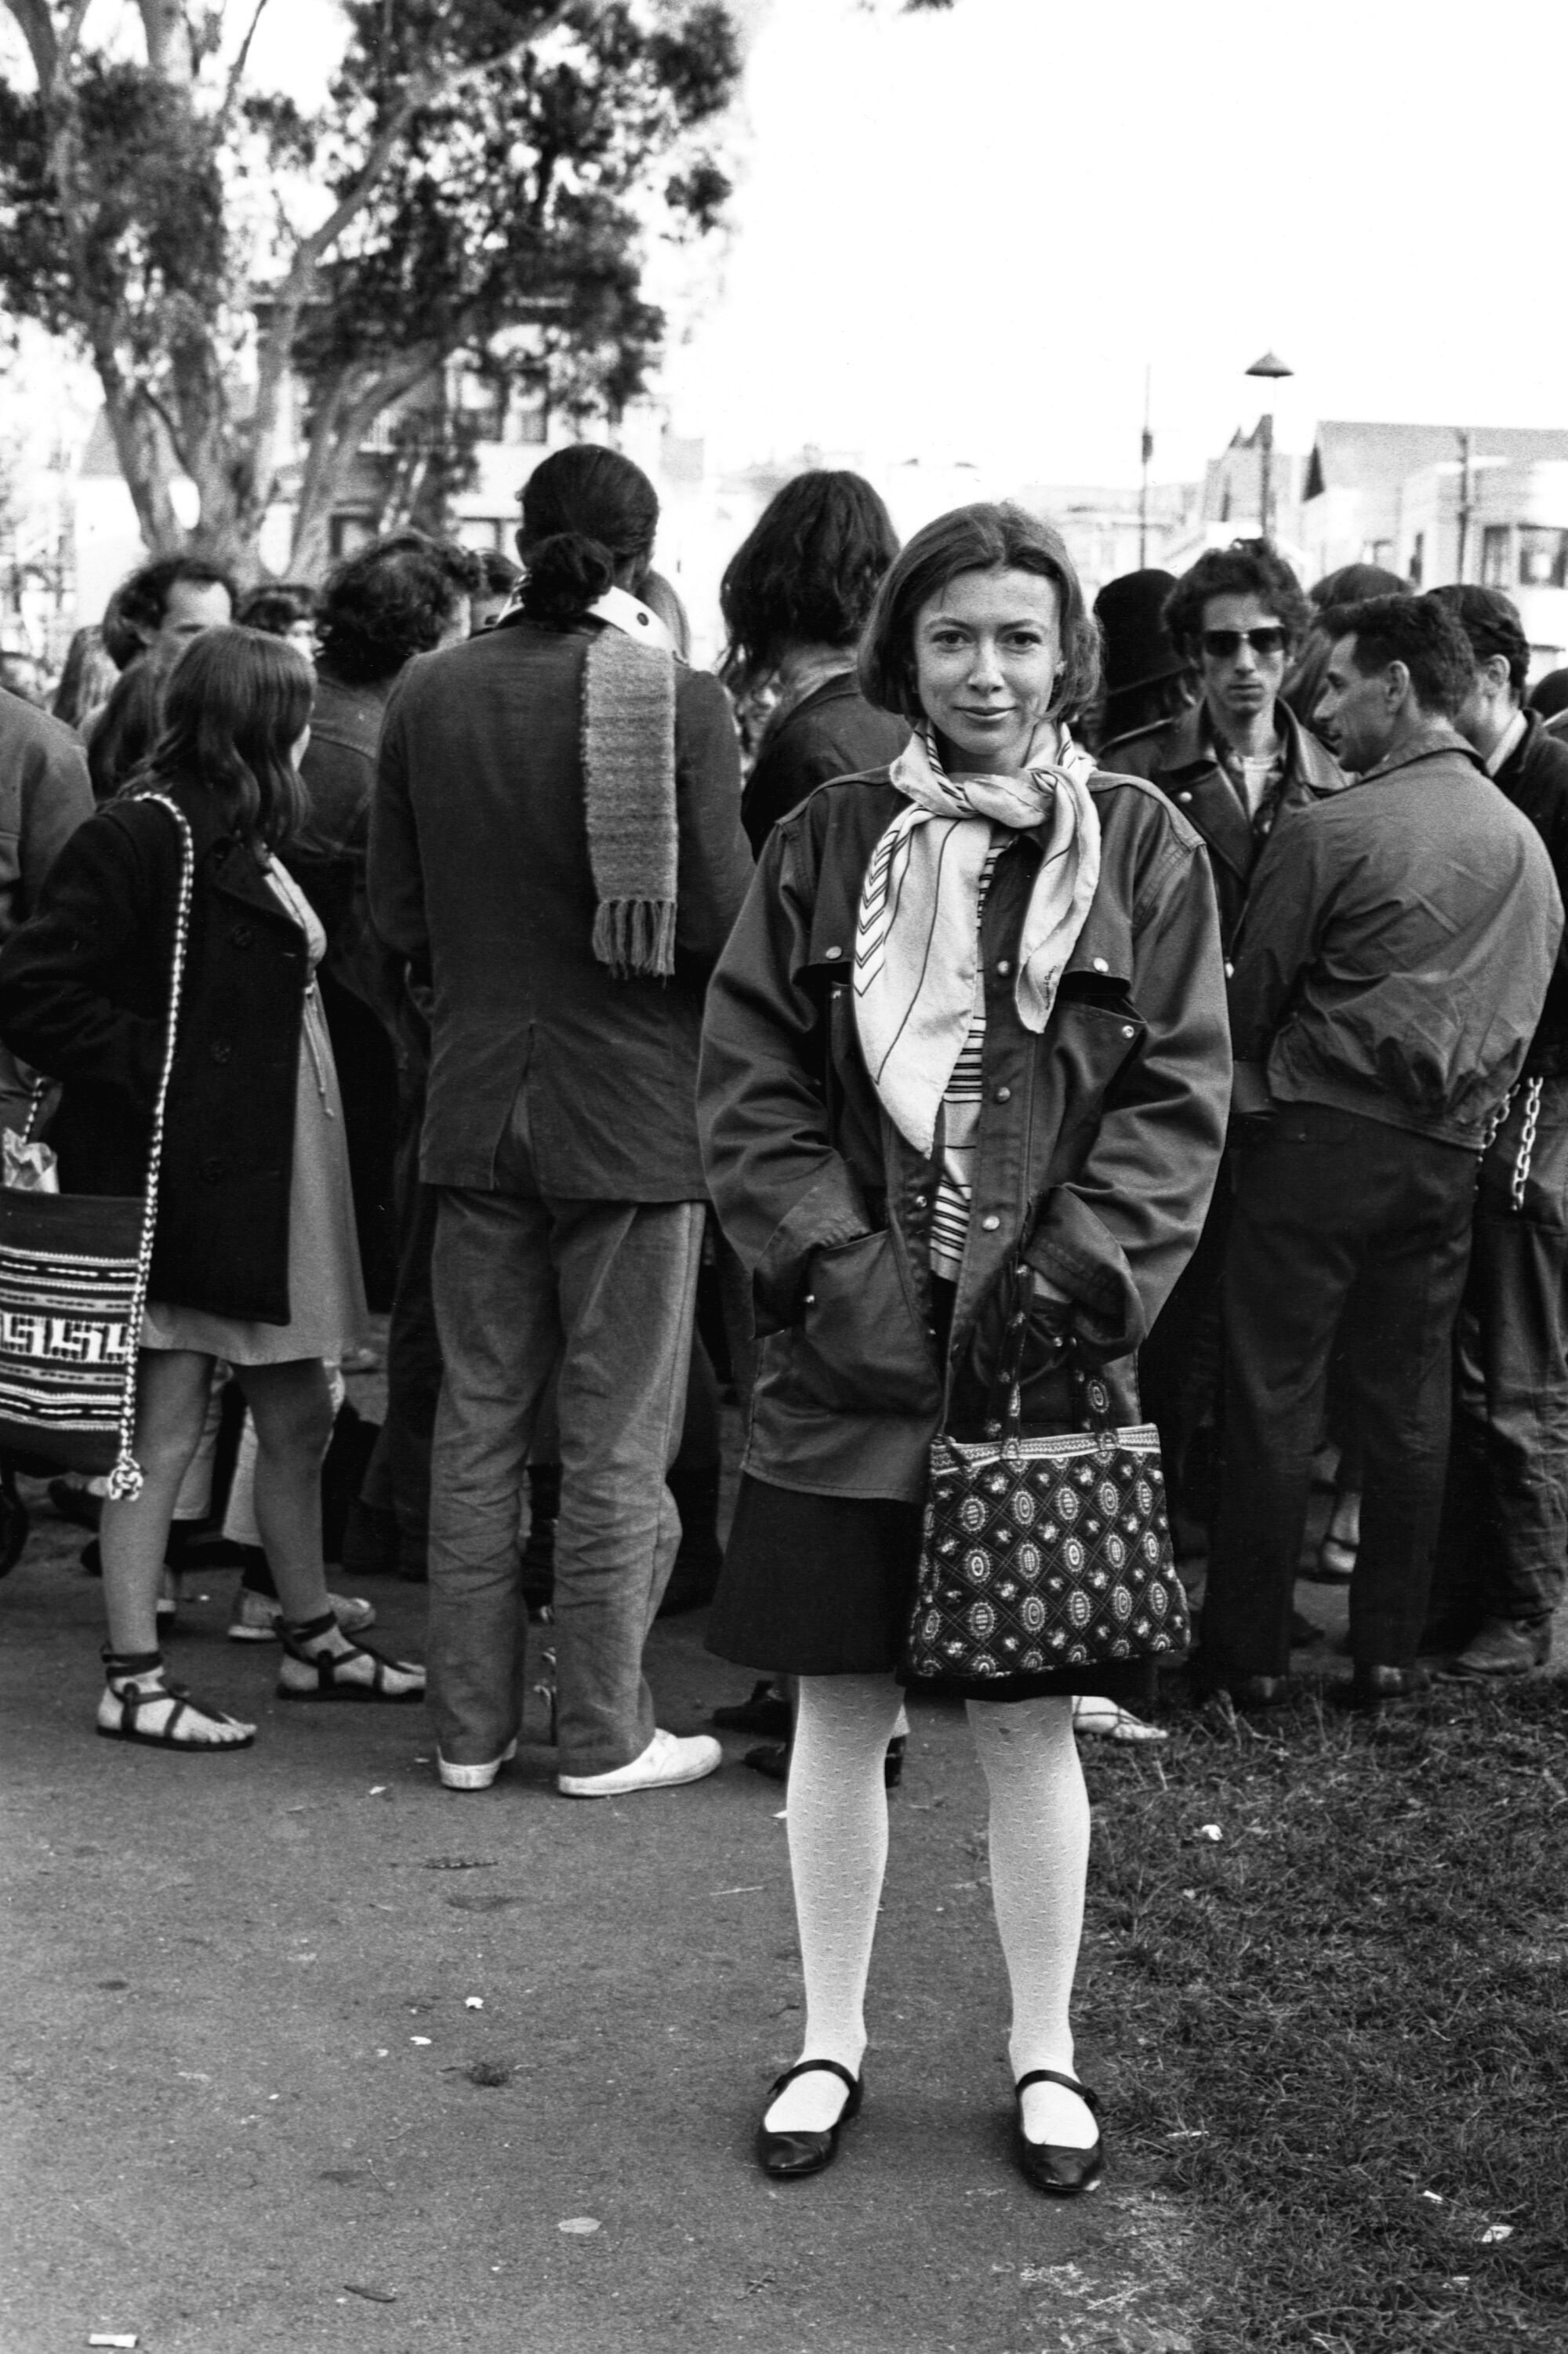 Joan Didion stands next to a group of people in a park in 1967.